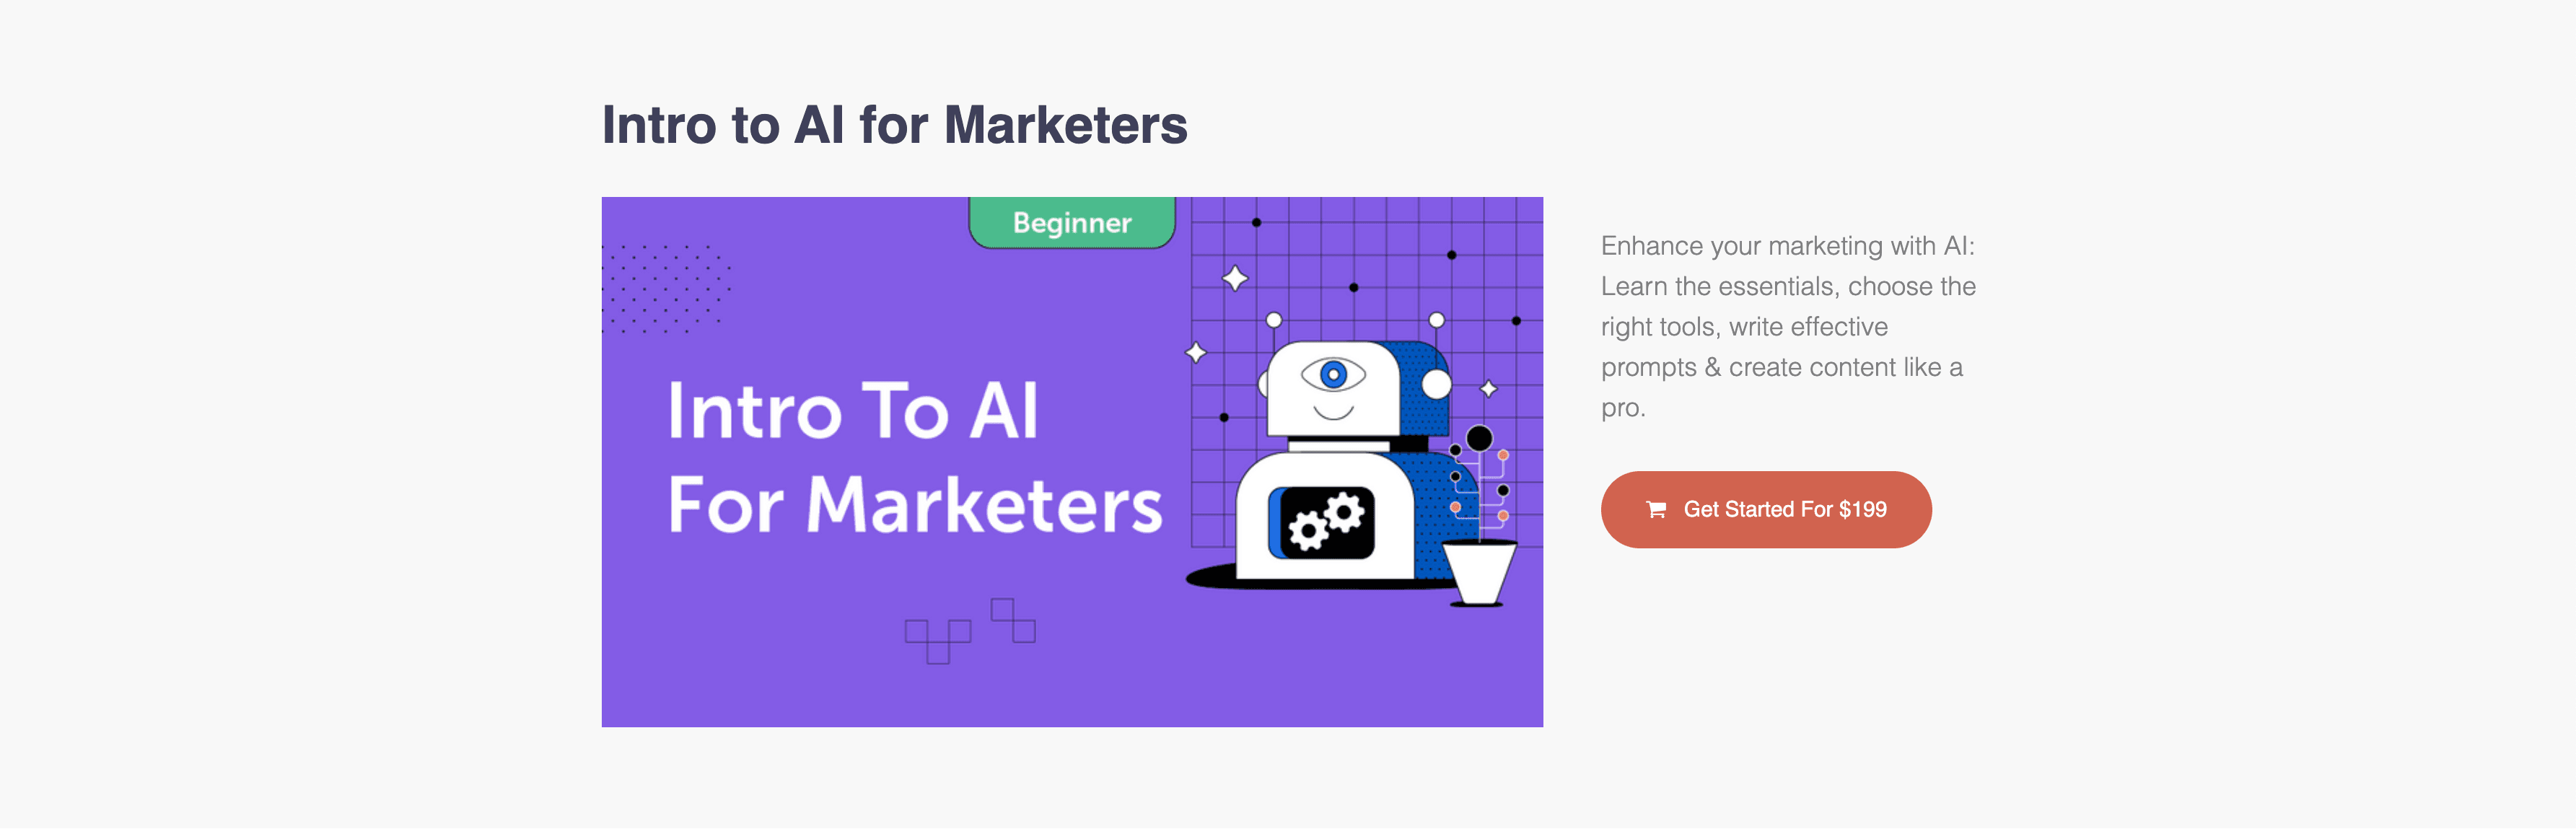 Actionable Marketing Institute Intro to AI for marketers course homepage